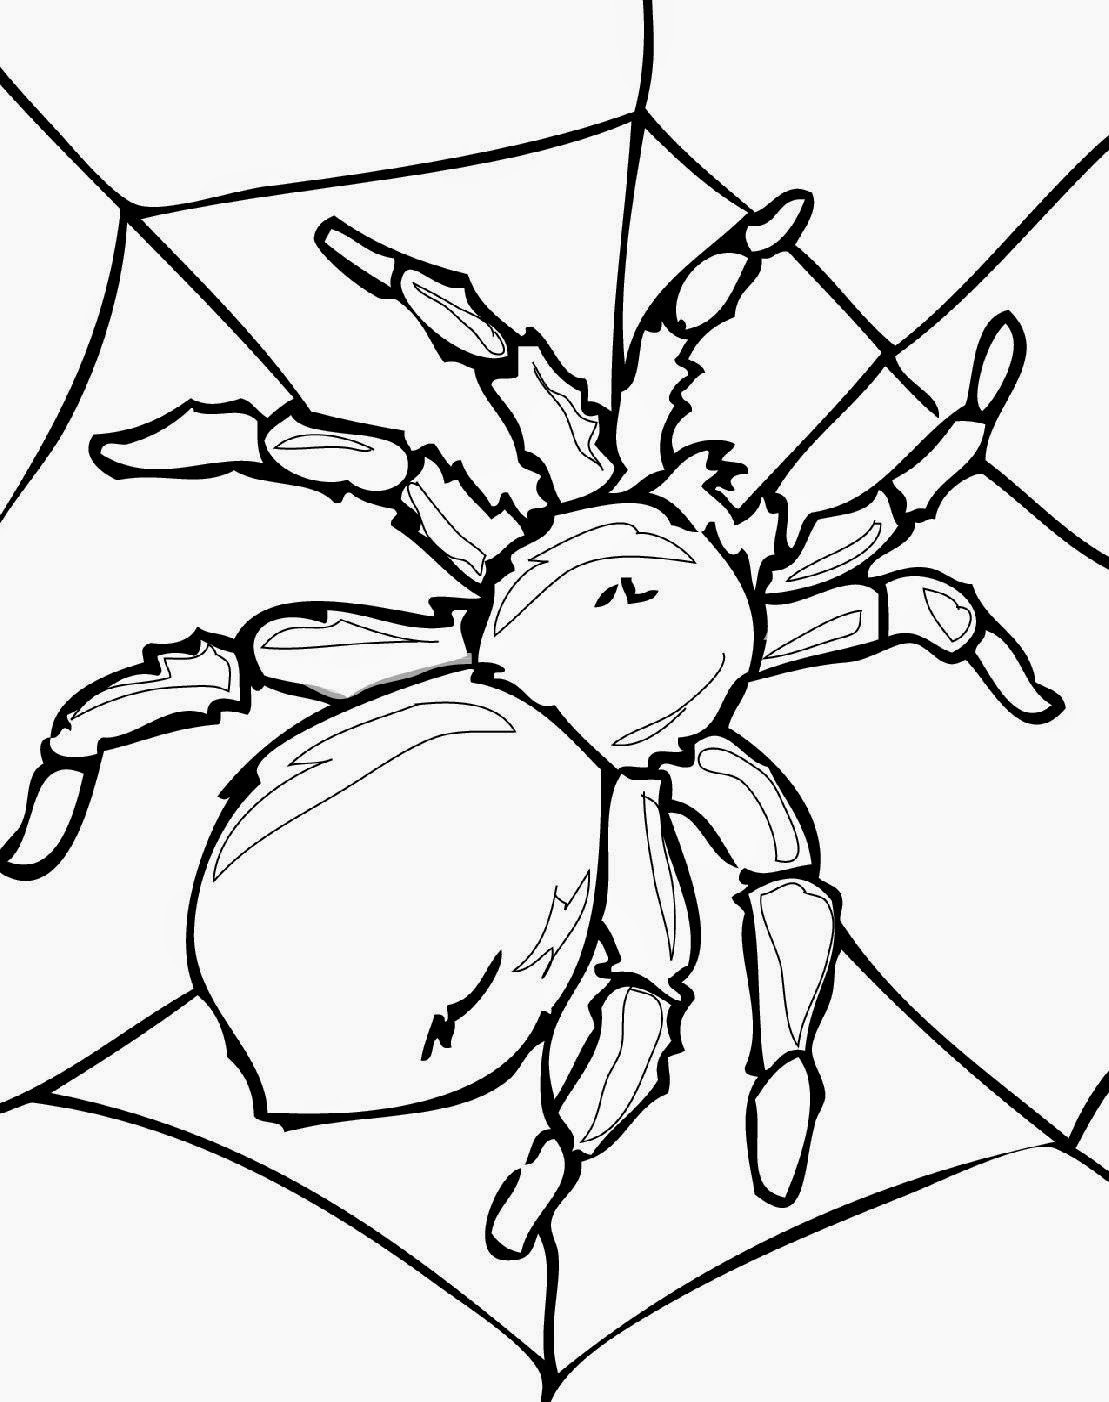 Printable Bug Coloring Pages
 Virus Coloring Pages Coloring Pages